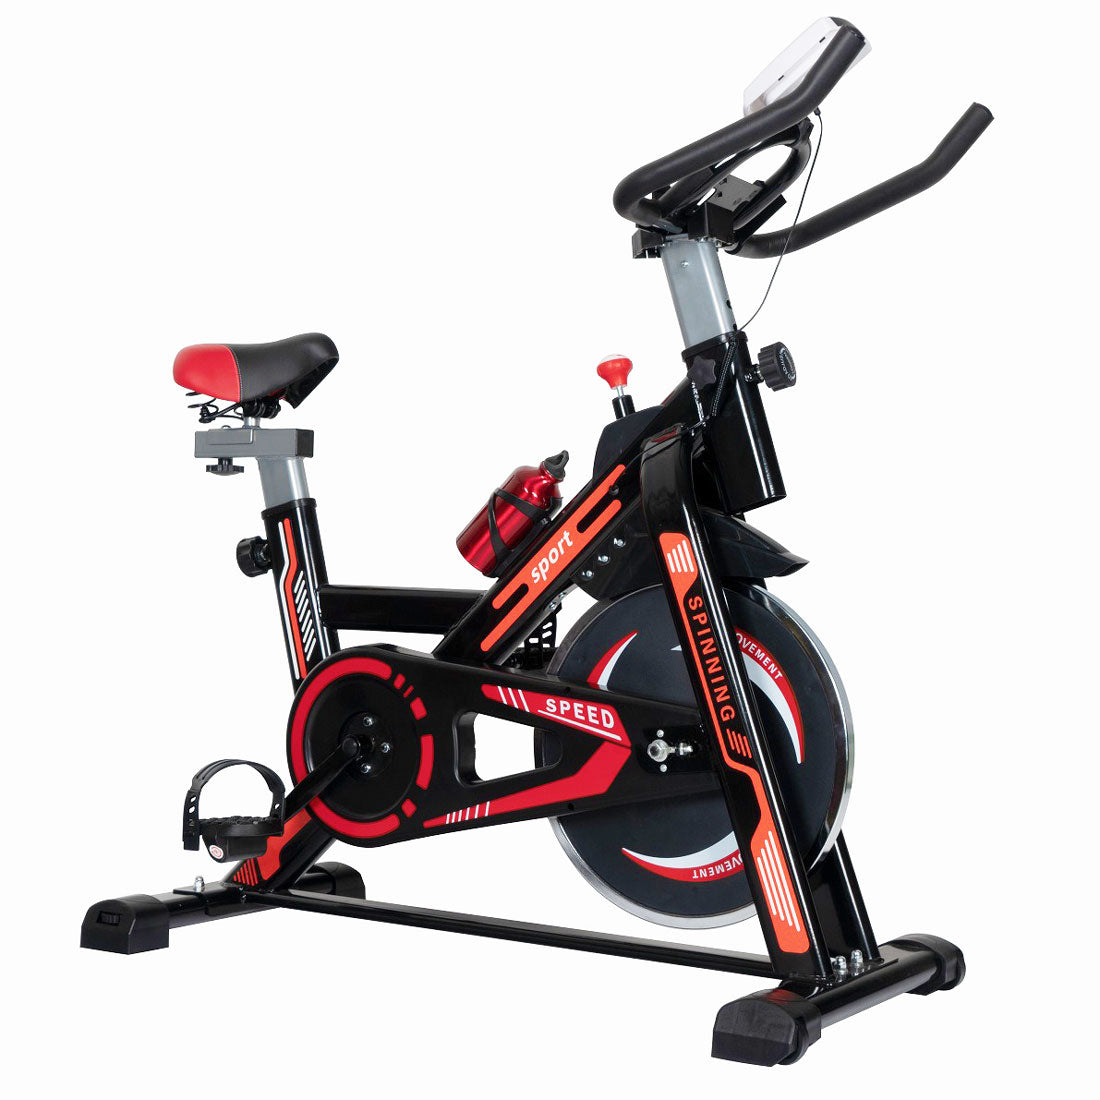 Exercise Spin Bike Home Gym Workout Equipment Cycling Fitness Bicycle 8kg Flywheel - red